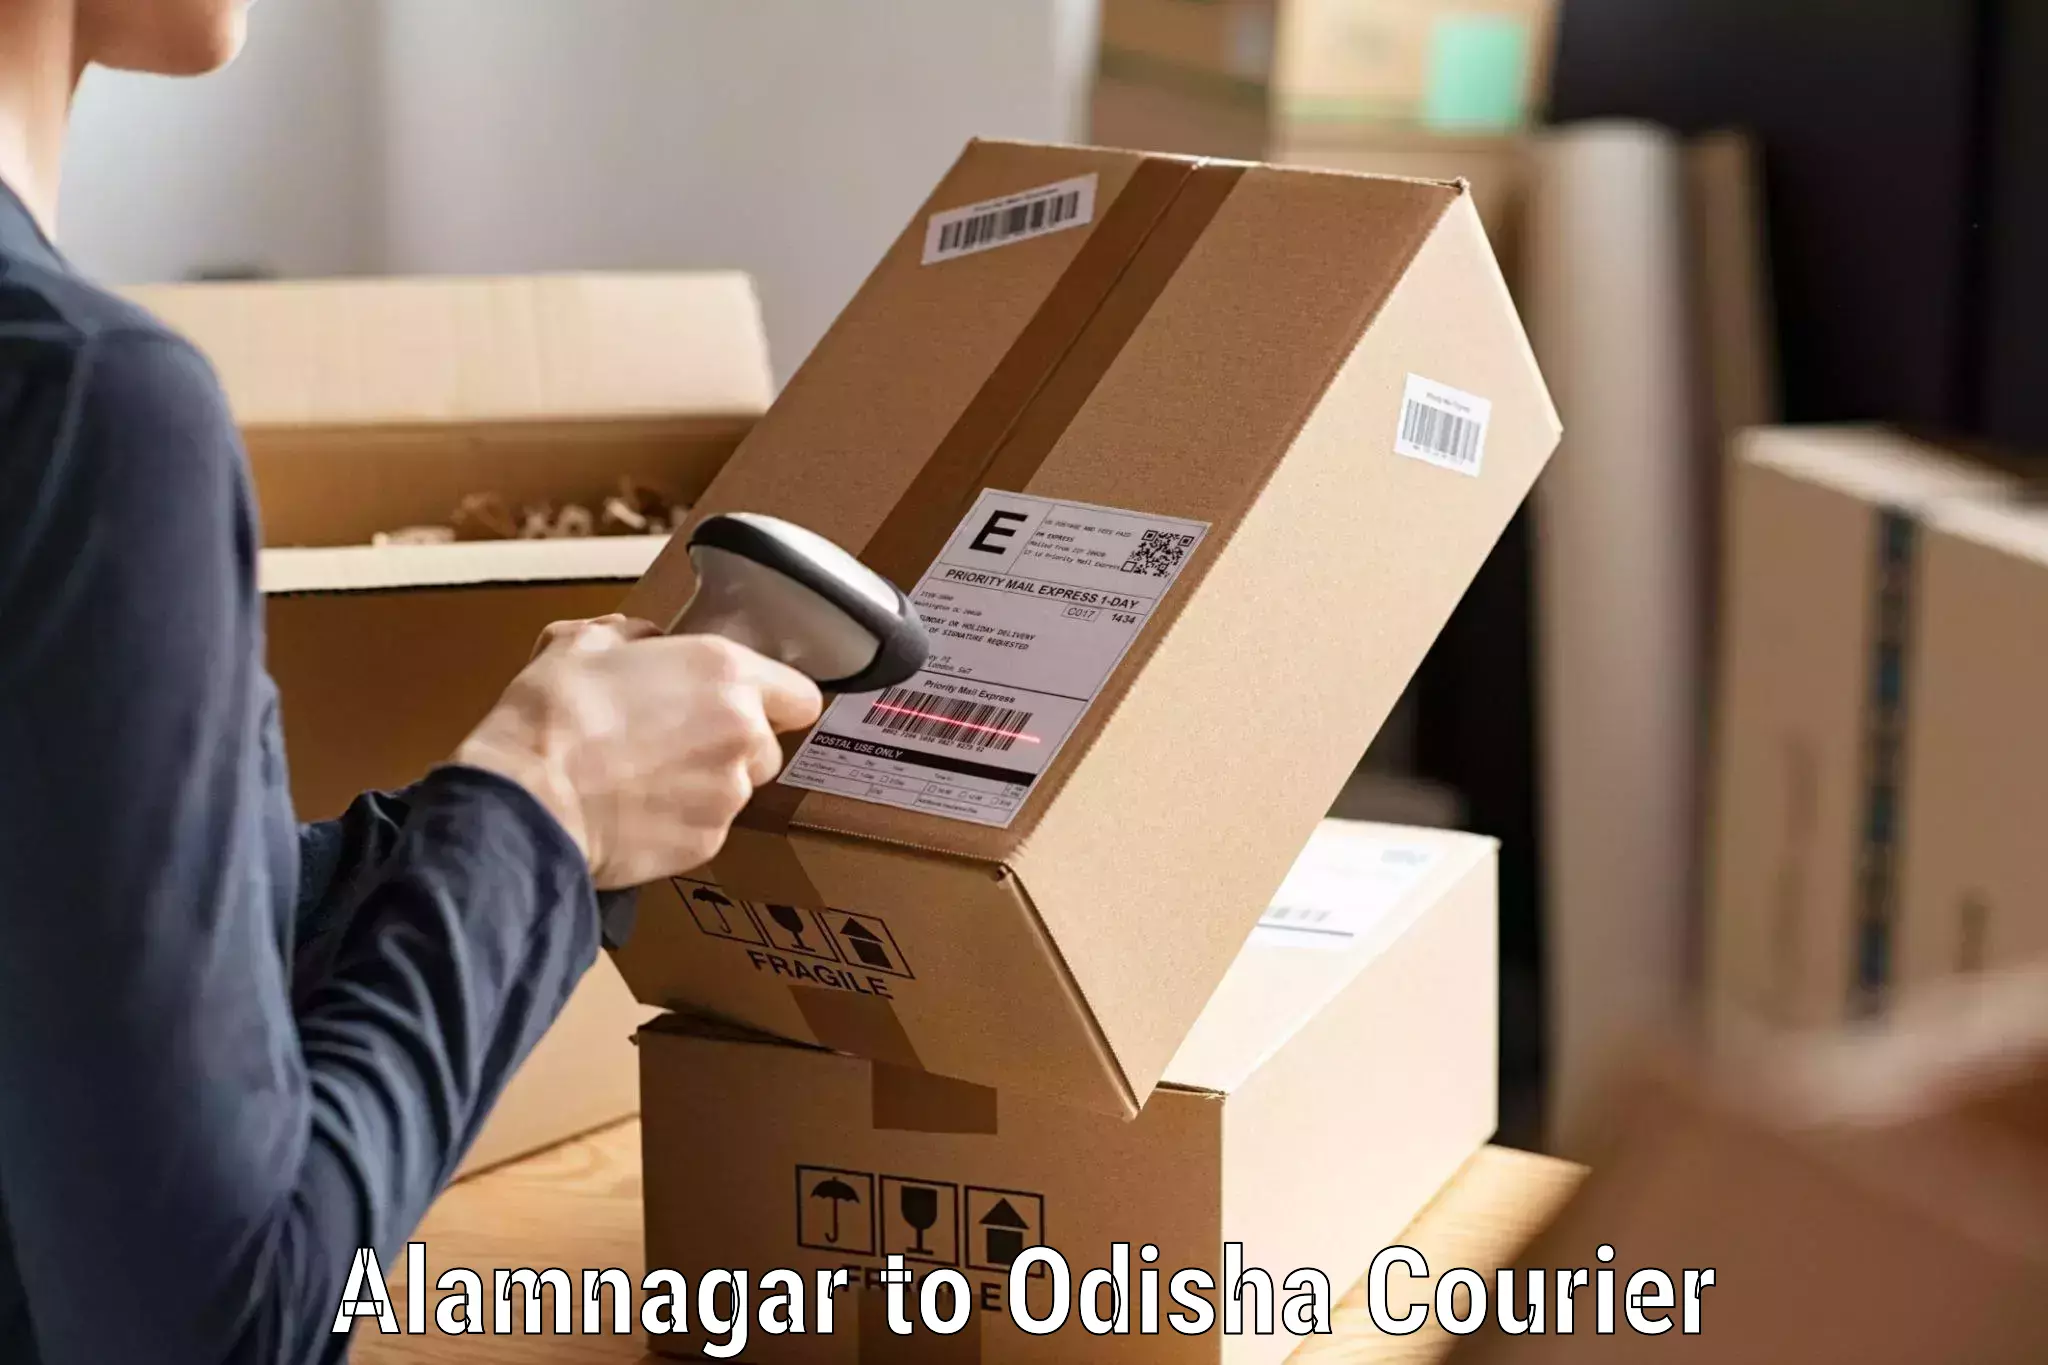 Personal courier services in Alamnagar to Chandipur